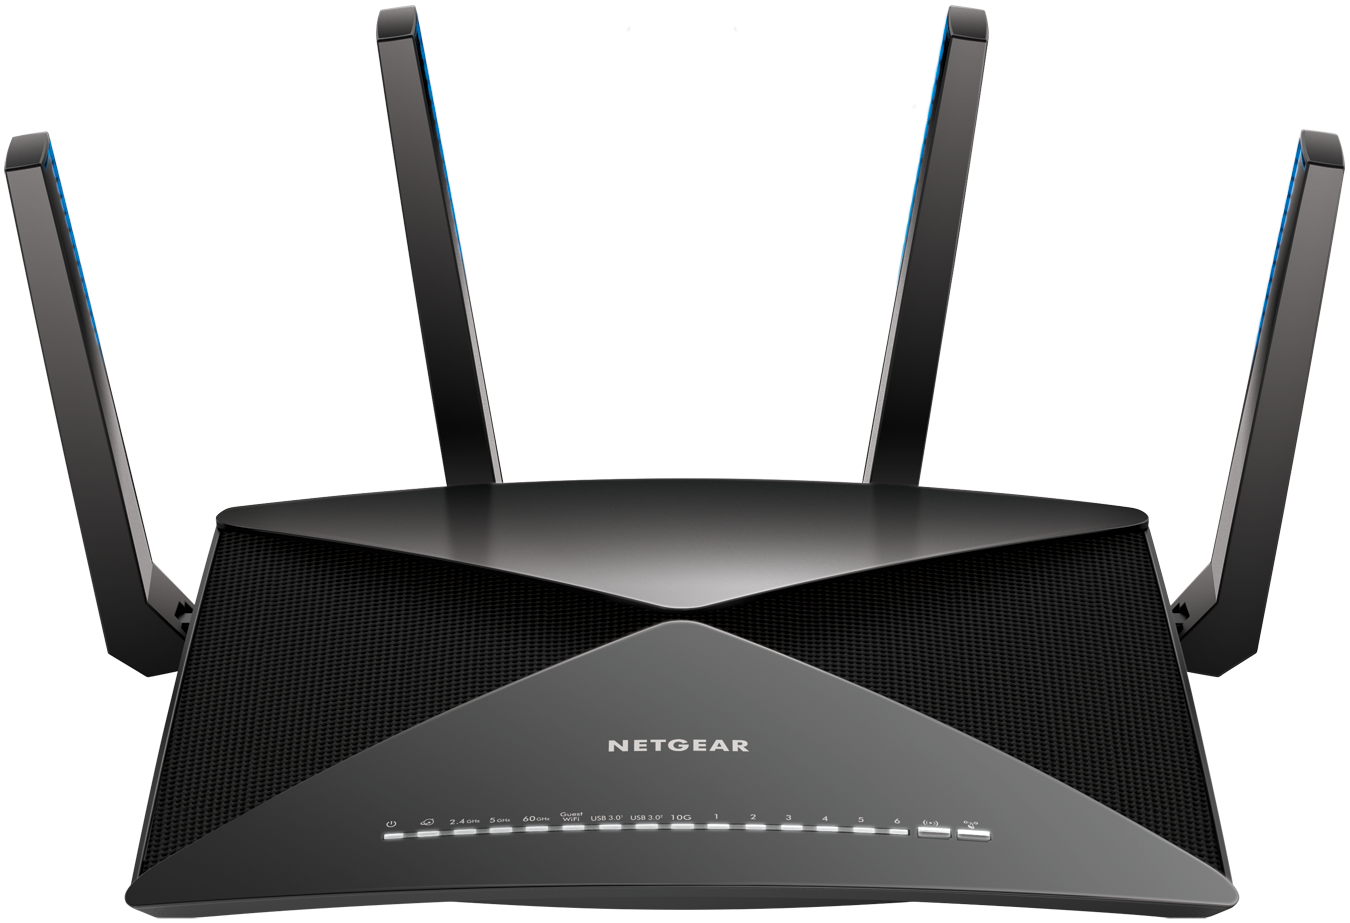 NETGEAR Nighthawk X10 – AD7200 802.11ac/ad WiFi Router with 1.7GHz Quad-core Processor (R9000) - image 1 of 6